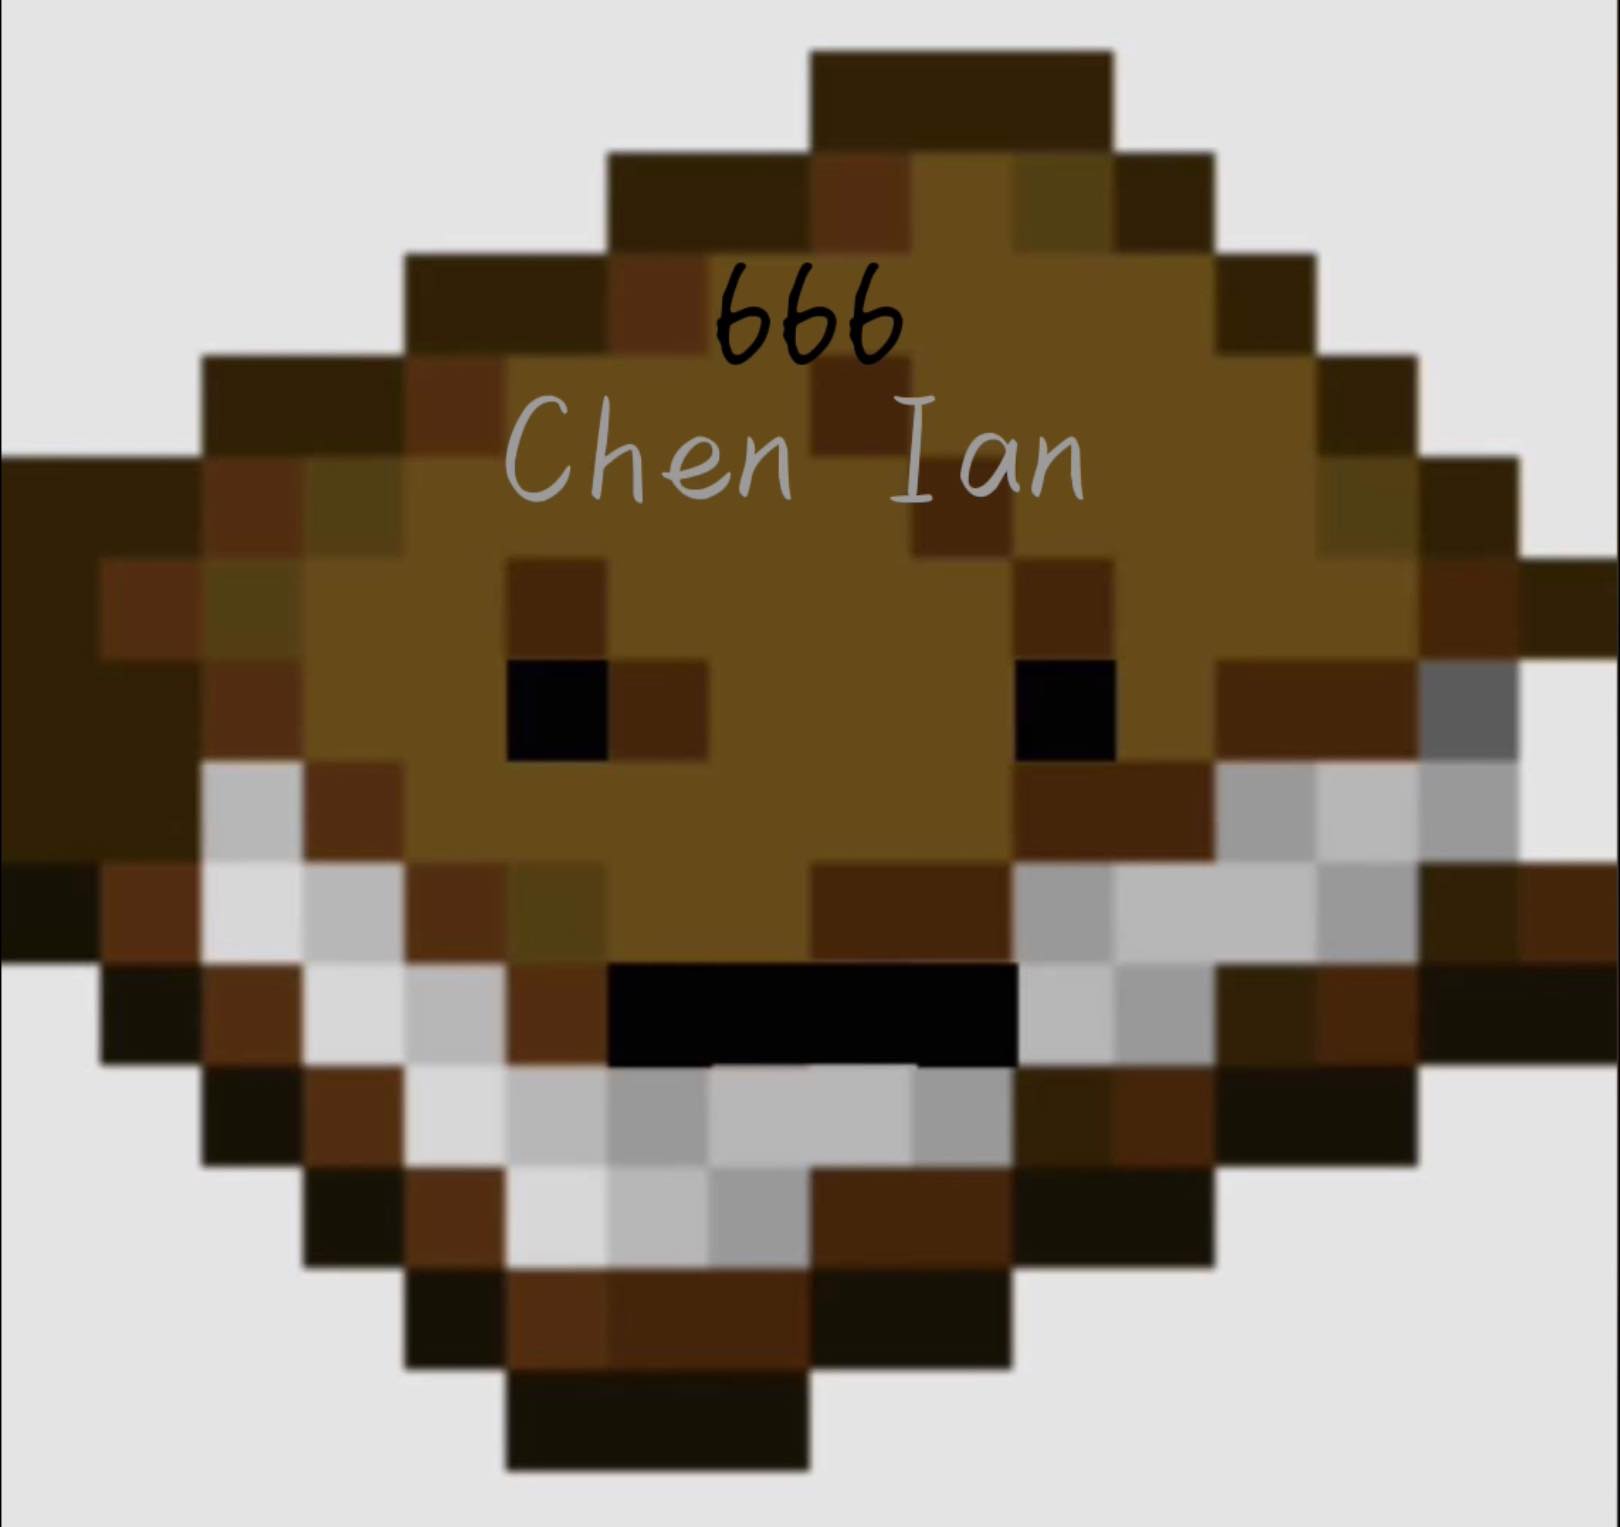 chenian0626_TW's Profile Picture on PvPRP